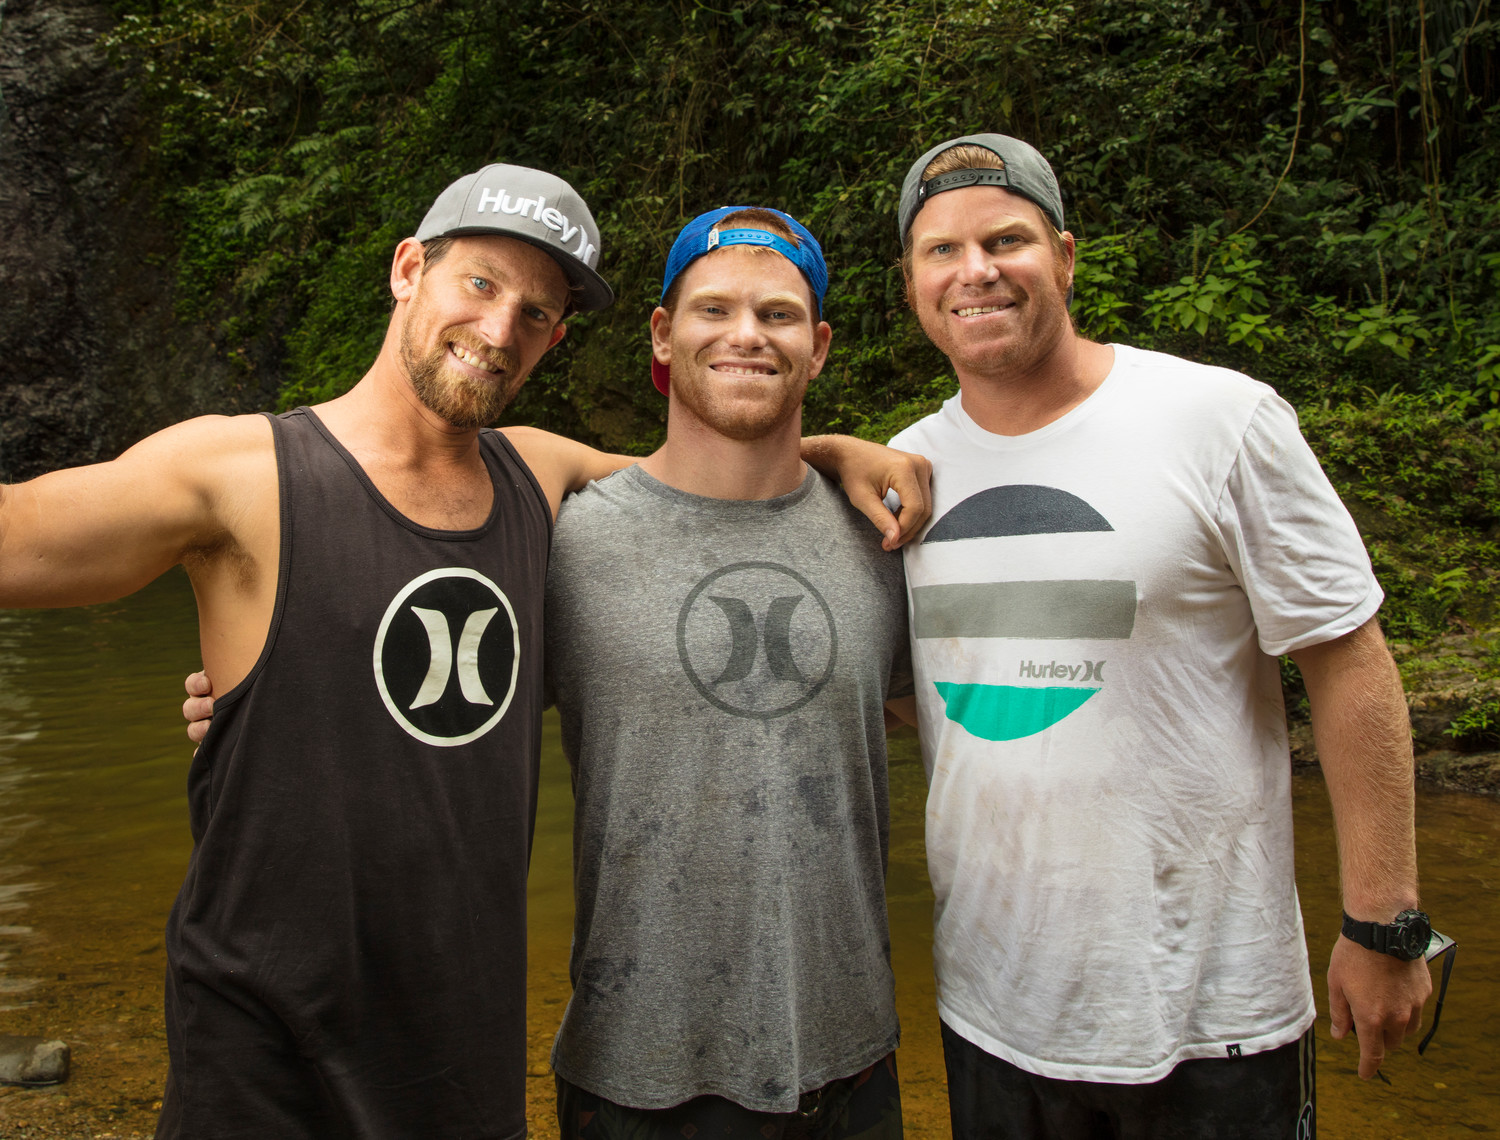 Long Beach residents Will, left, Woody and Cliff Skudin in Puerto Rico in March. Through their nonprofit organization Surf for All, the Skudins and their group of volunteers launched a relief effort to help the island’s Rincon community after Hurricane Maria.